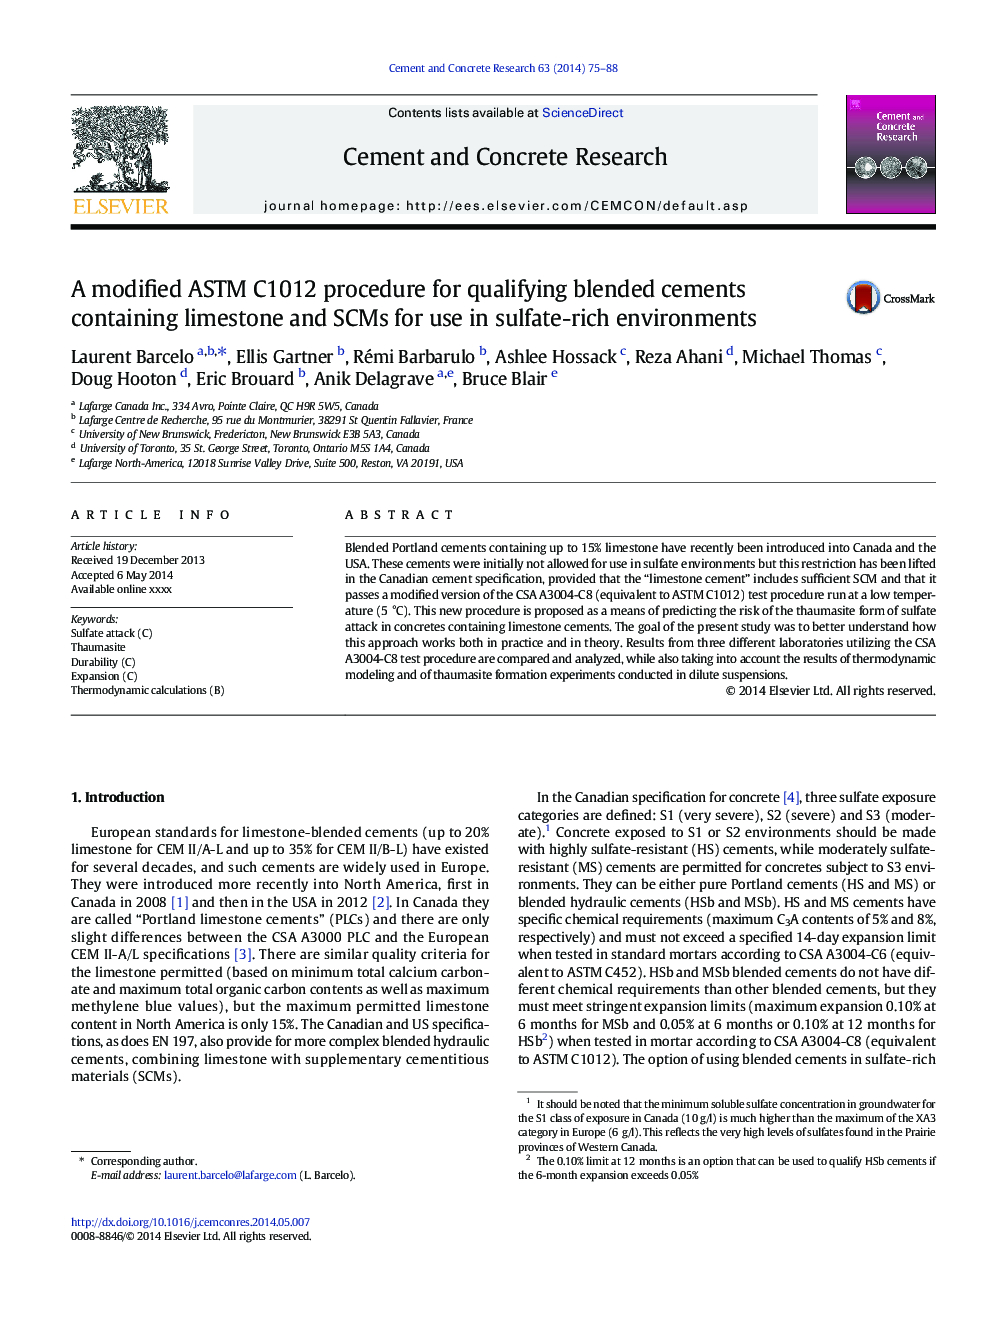 A modified ASTM C1012 procedure for qualifying blended cements containing limestone and SCMs for use in sulfate-rich environments